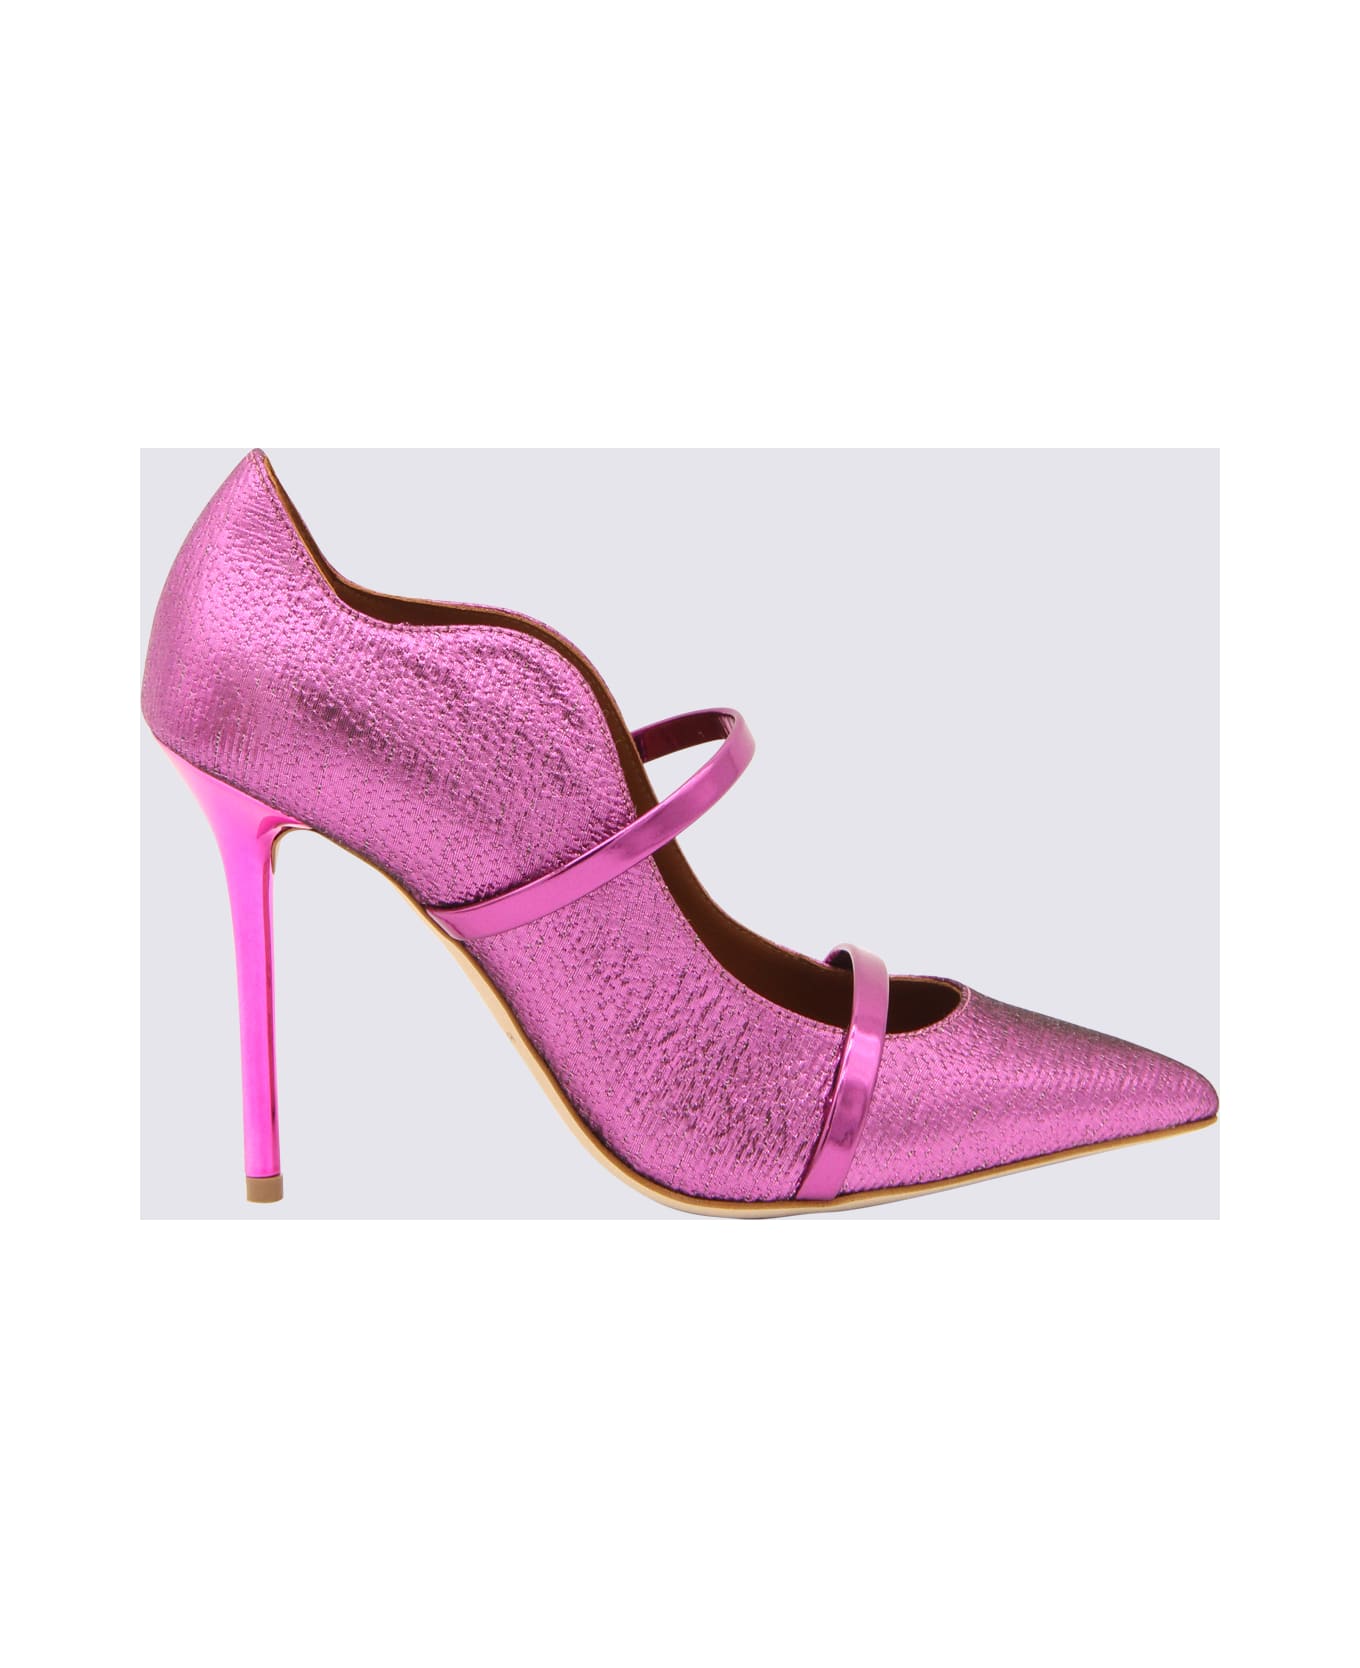 Malone Souliers Violet Leather Maureen Pumps